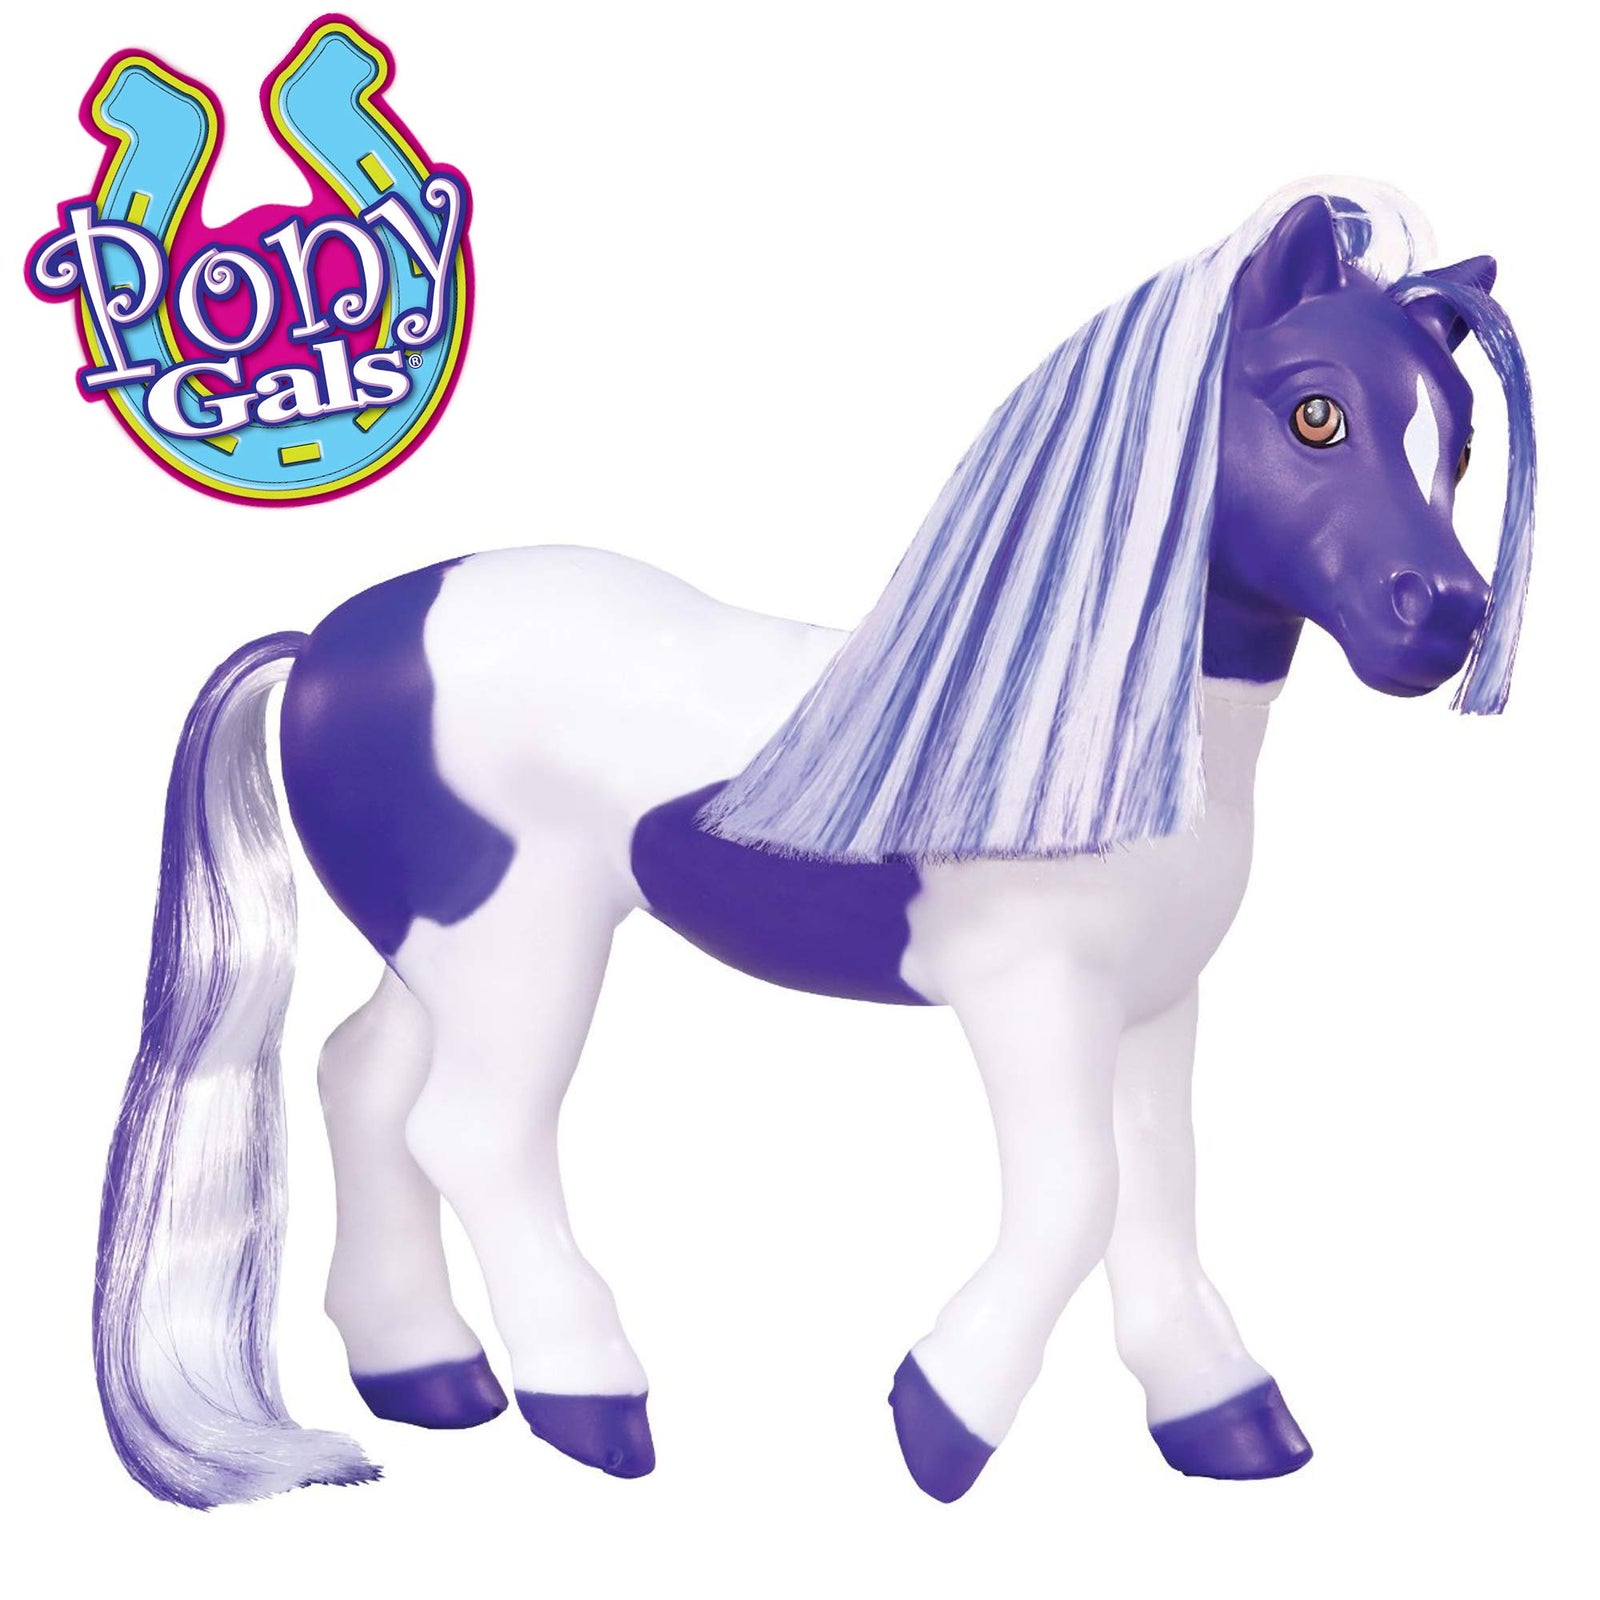 Breyer Horses Color Changing Bath Toy | Luna The Unicorn | Purple / Pink / White with Surprise Blue Color | 8.5" x 7" | Unicorn Toy | Ages 3+ | Model #7233, Purple, White, Pink